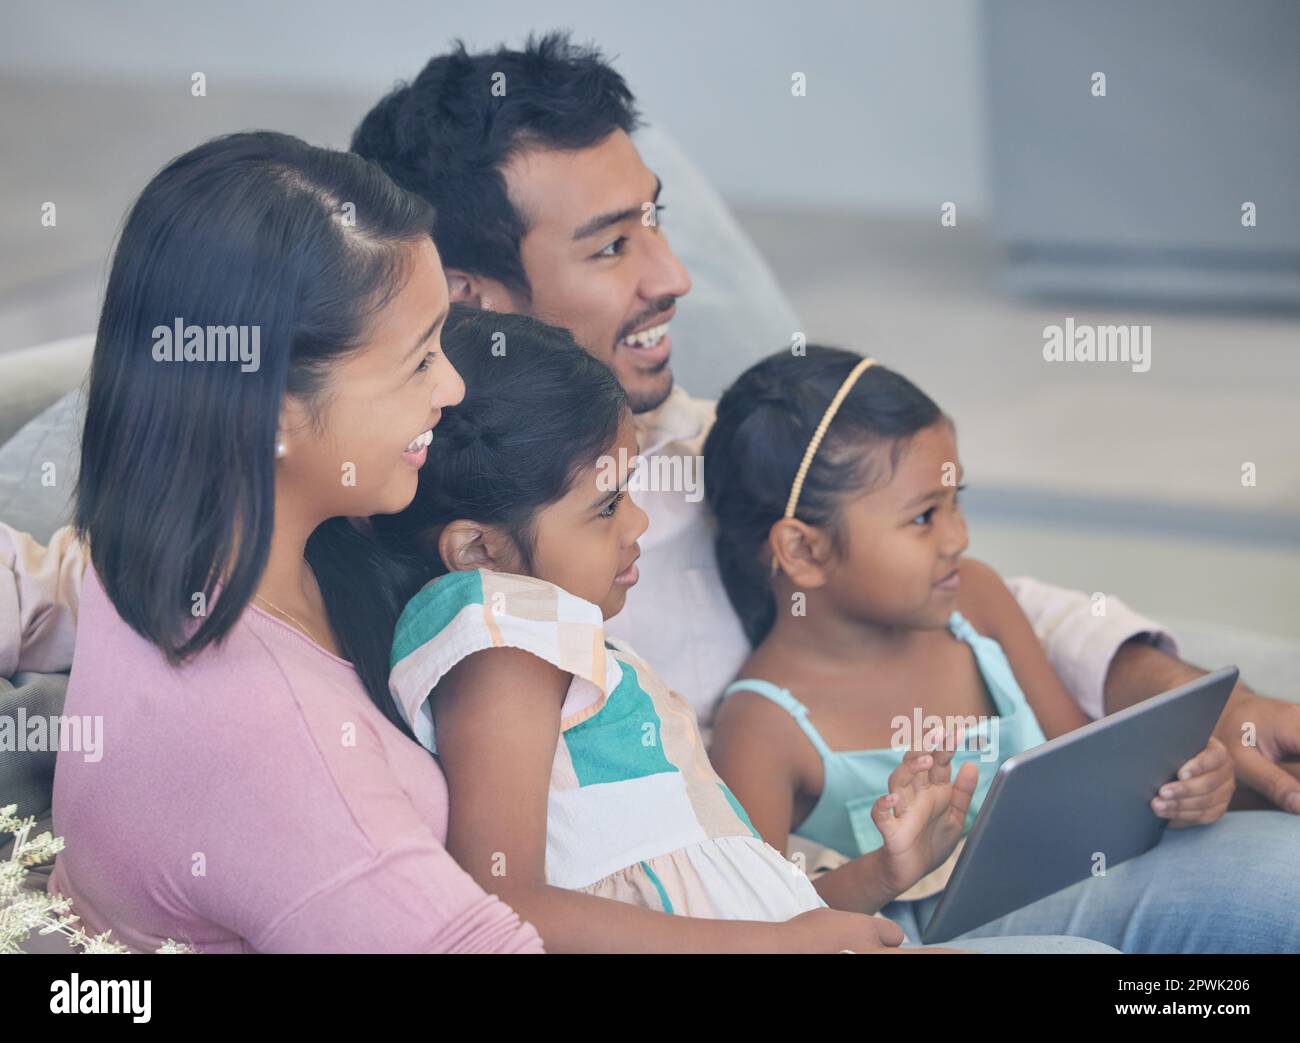 Teaching the little ones the way of the world. a young family relaxing together while using a digital tablet Stock Photo